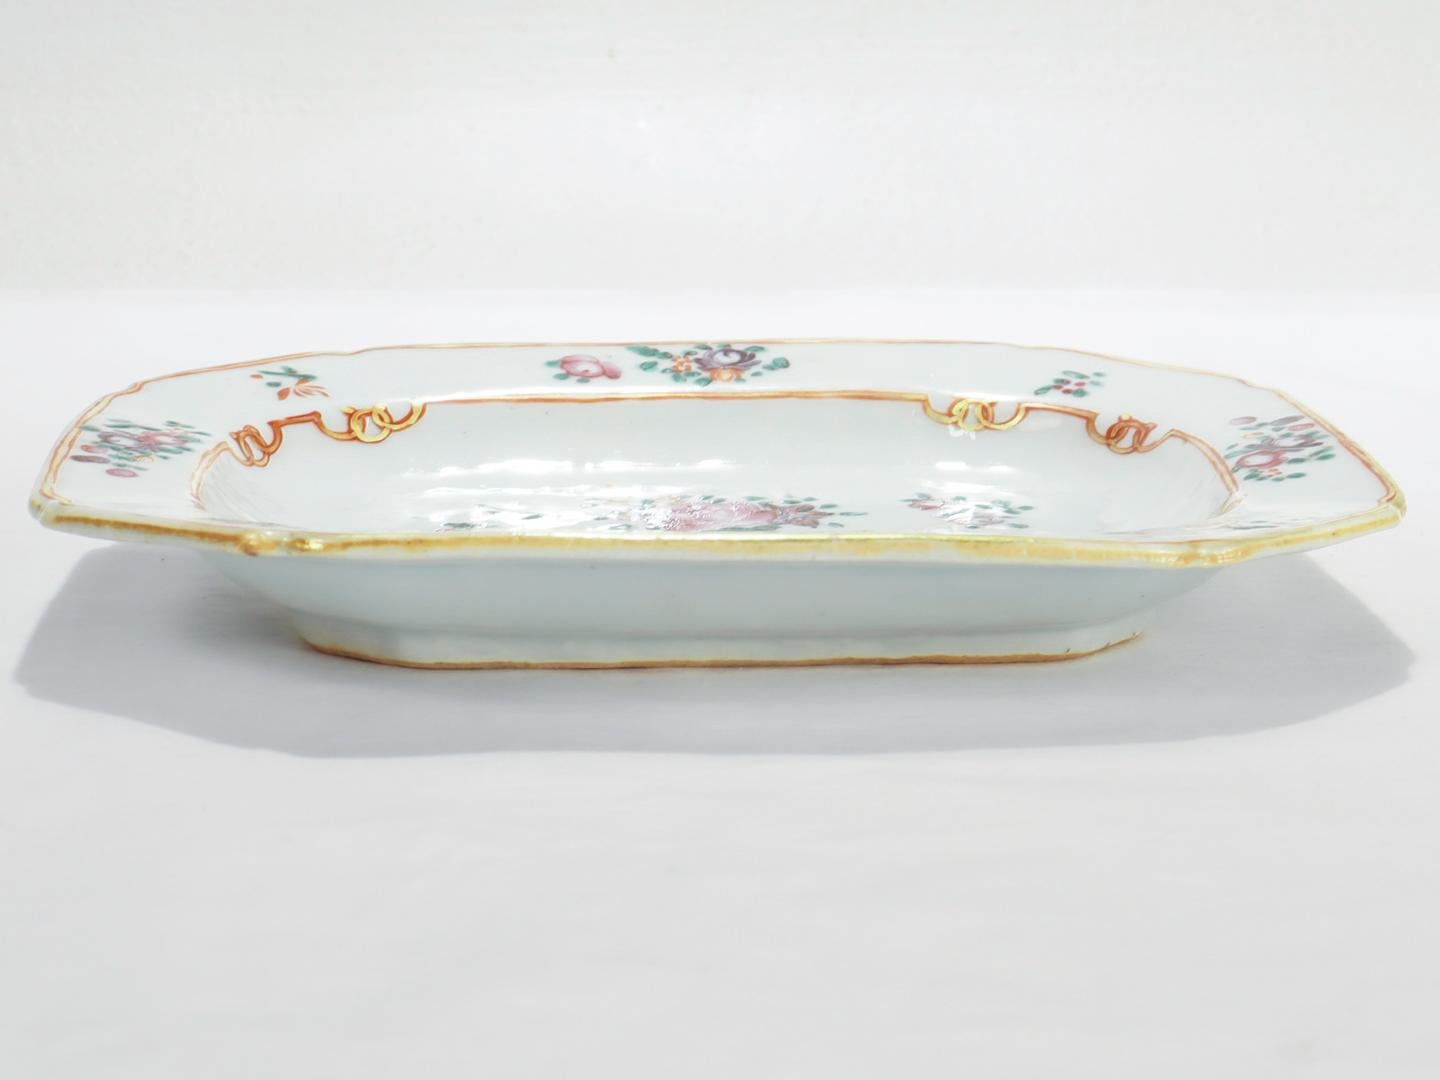 Small Antique 18th Century Famille Rose Chinese Export Tray or Dish For Sale 4